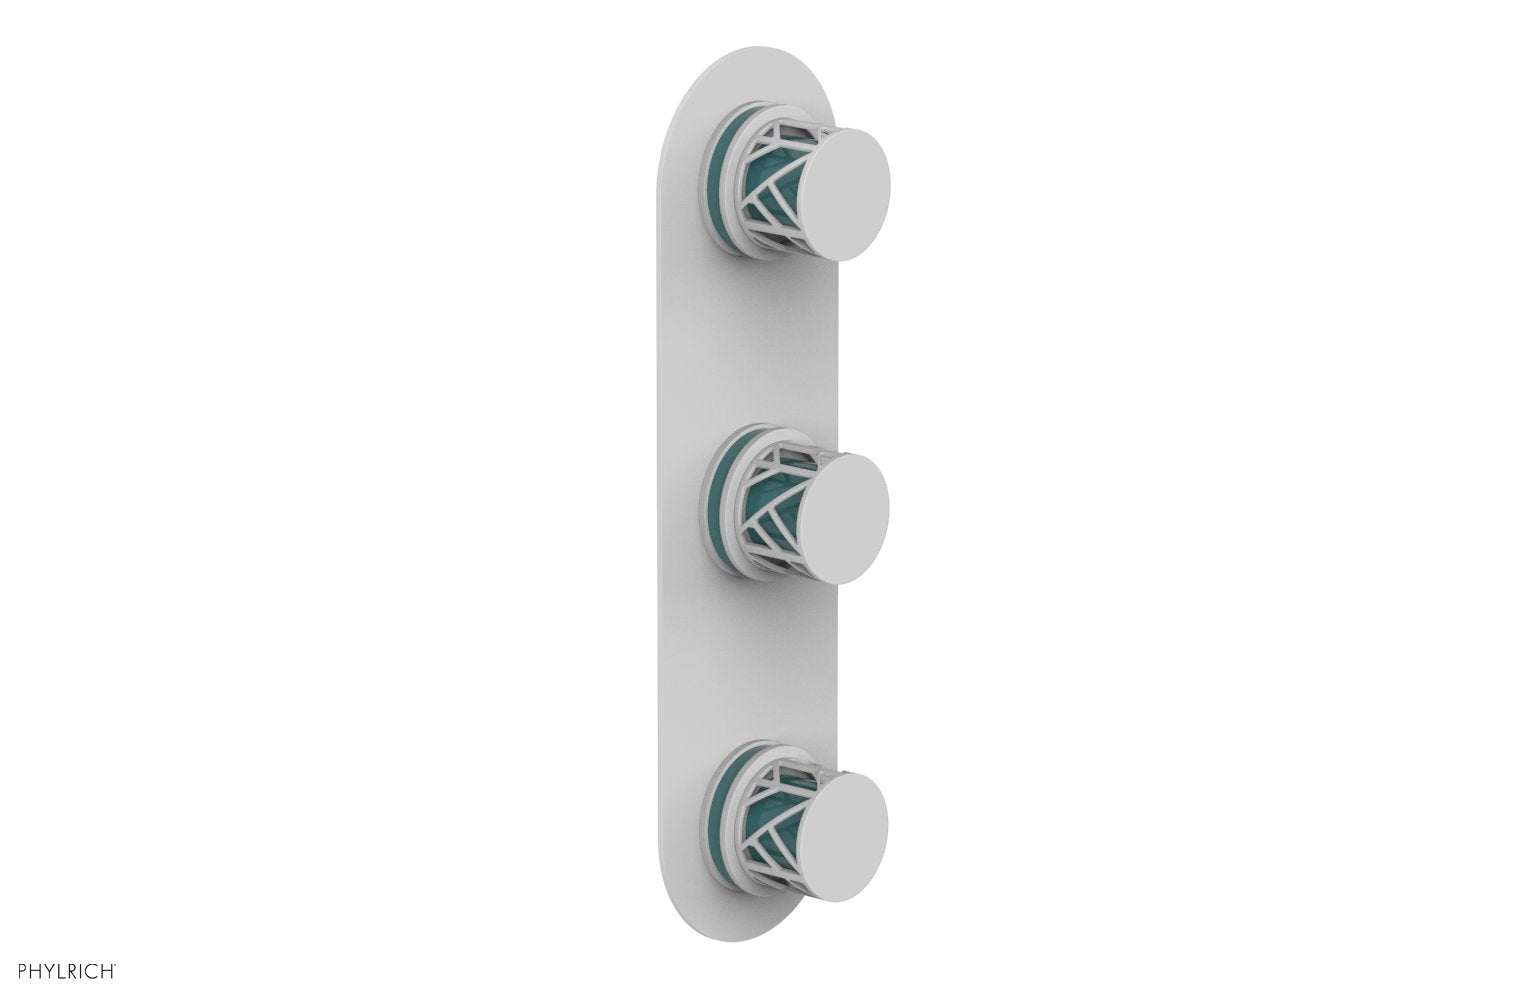 Phylrich JOLIE Thermostatic Valve with Two Volume Control with "Turquoise" Accents